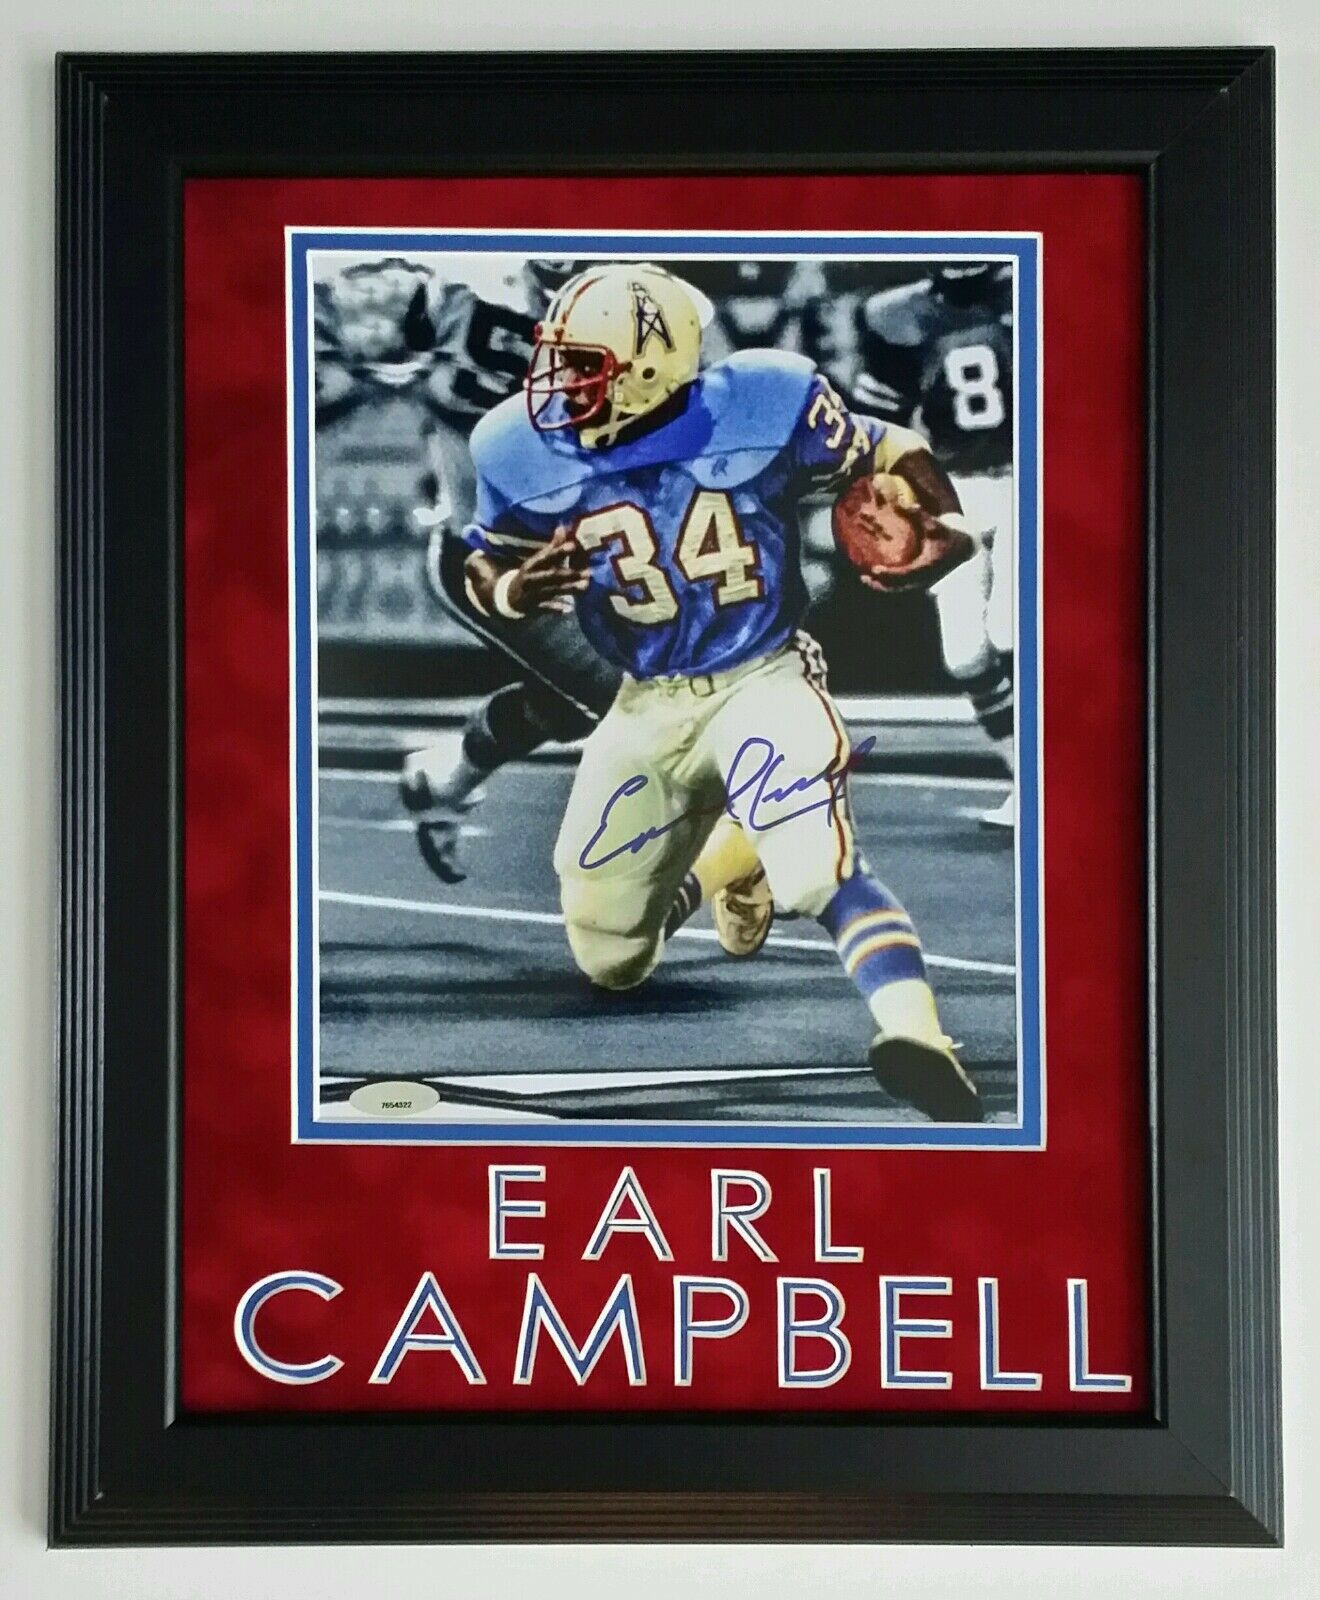 Earl Campbell Authentic Signed Framed 8x10 Photo Autographed Tristar